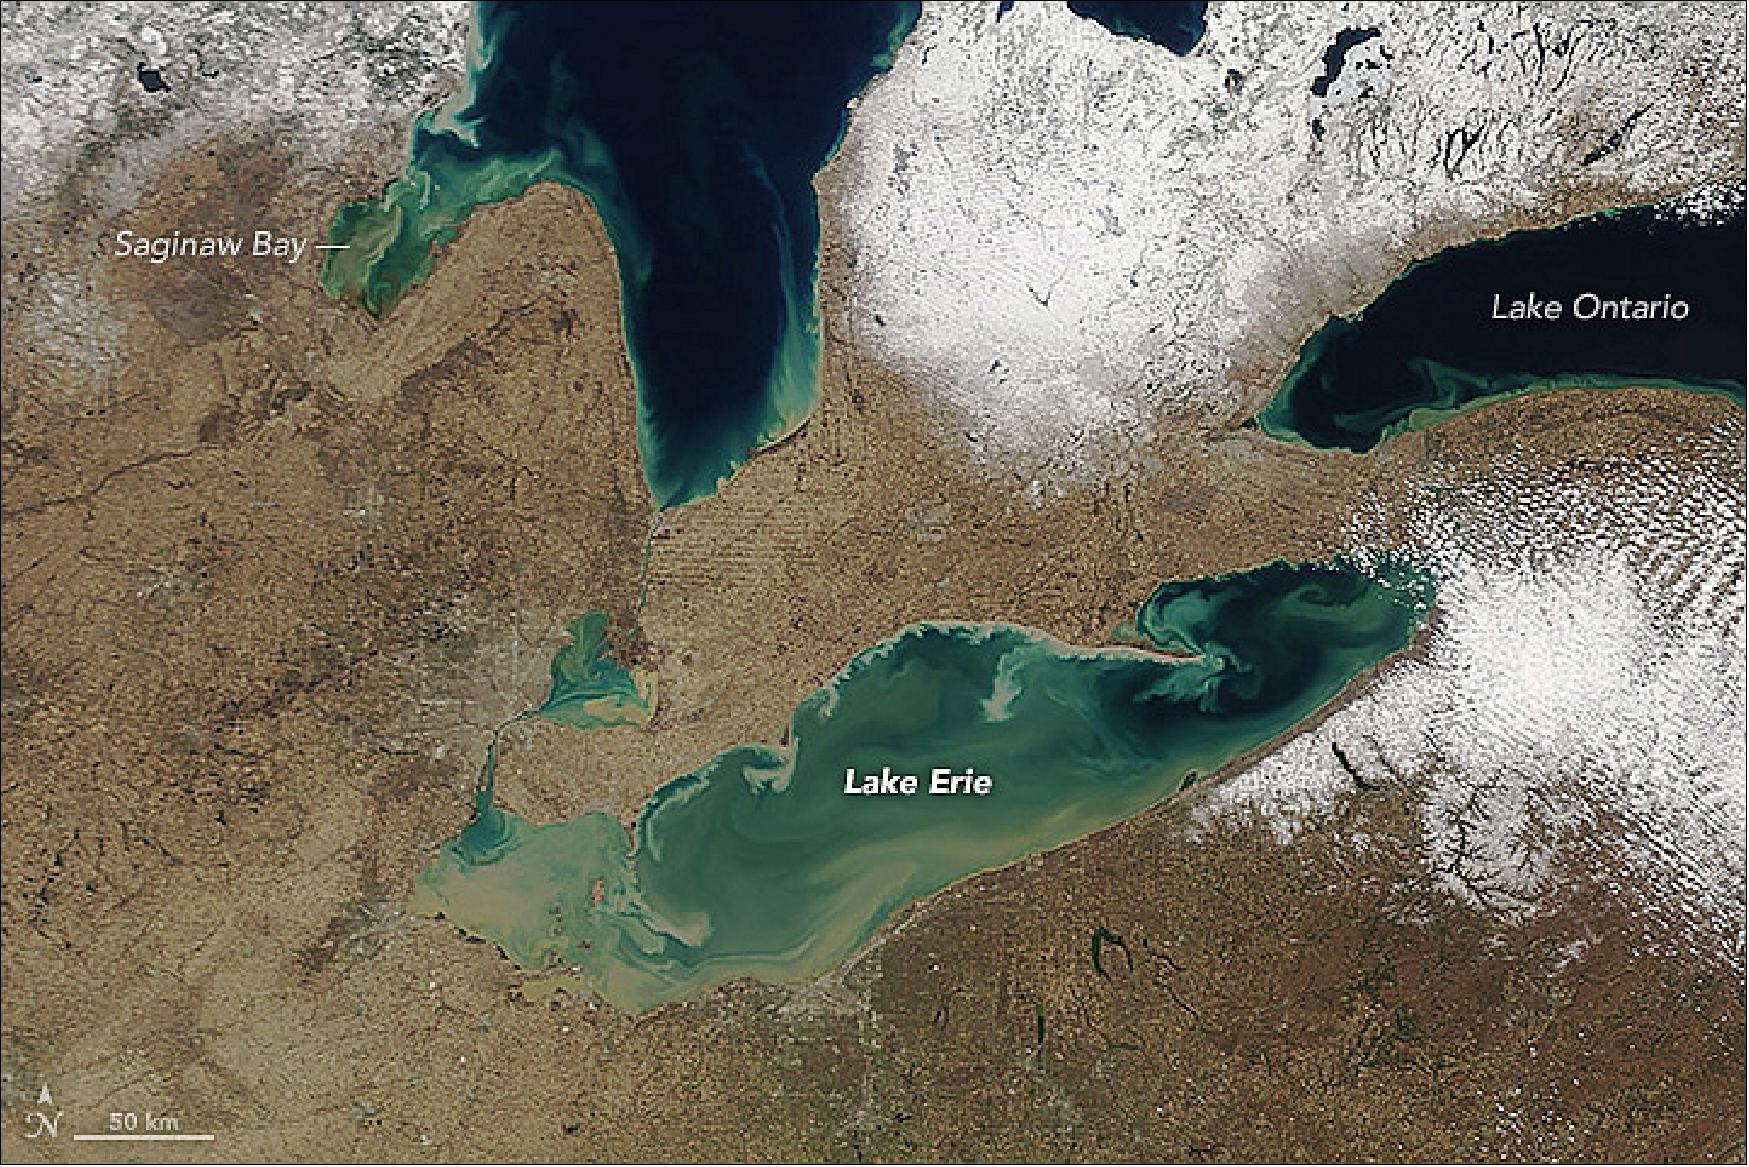 Figure 27: MODIS on NASA's Terra satellite captured this image on April 20, 2018. After the storm, bloated rivers and streams dumped sediment-rich water into the lakes. Brisk spring winds combined with lake currents to send tendrils of mud and other debris swirling into deeper, bluer waters (image credit: NASA Earth Observatory, image by Adam Voiland, using MODIS data from LANCE/EOSDIS Rapid Response, story by Adam Voiland)